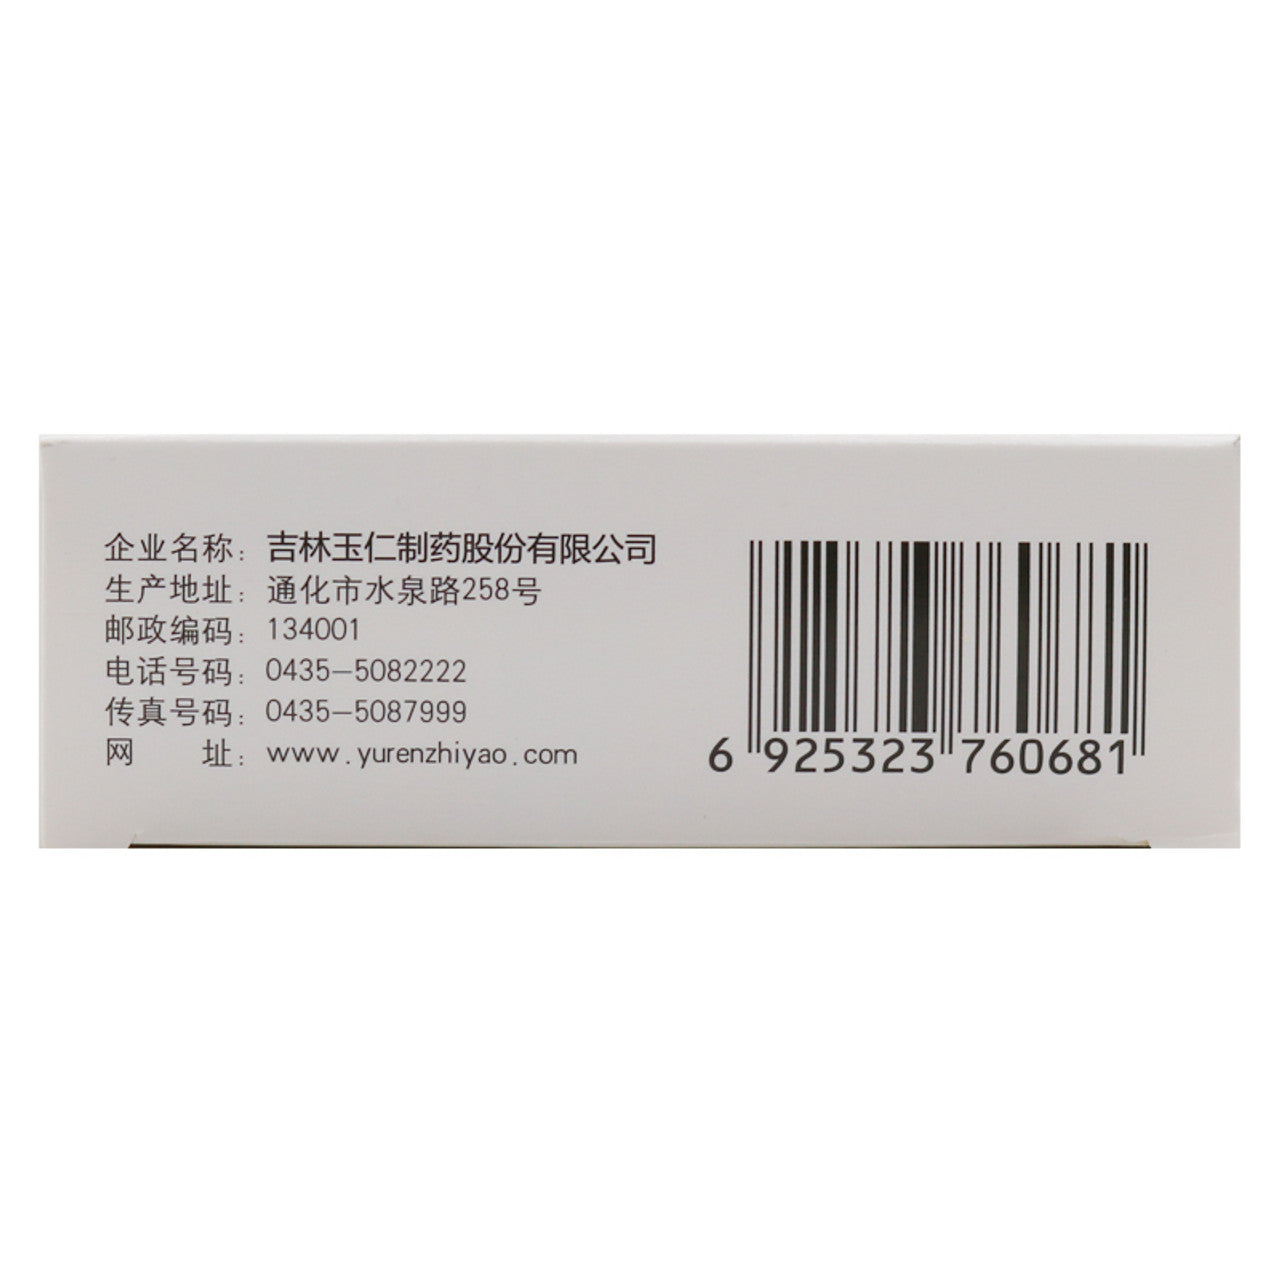 48 Tablets*5 boxes. Traditional Chinese Medicine. Ming Mu Shang Qing Pian or Mingmu Shangqing Pian For outbreak of hot eyes, redness, swelling and pain, dizziness, itchy eyes, dry stools, red and yellow urine caused by exogenous wind-heat.